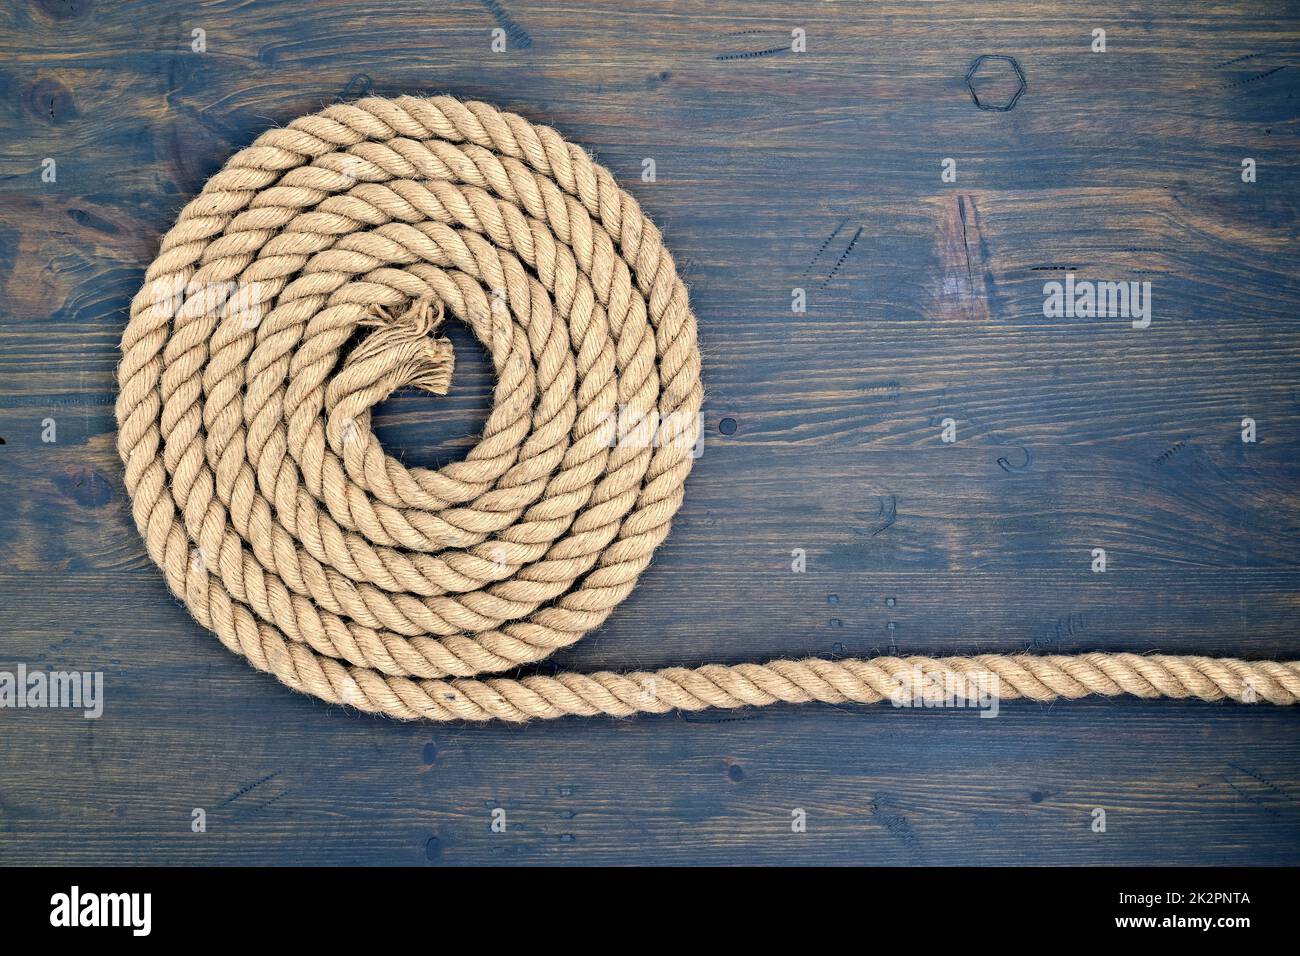 Braided natural jute rope over a rustic wood Stock Photo